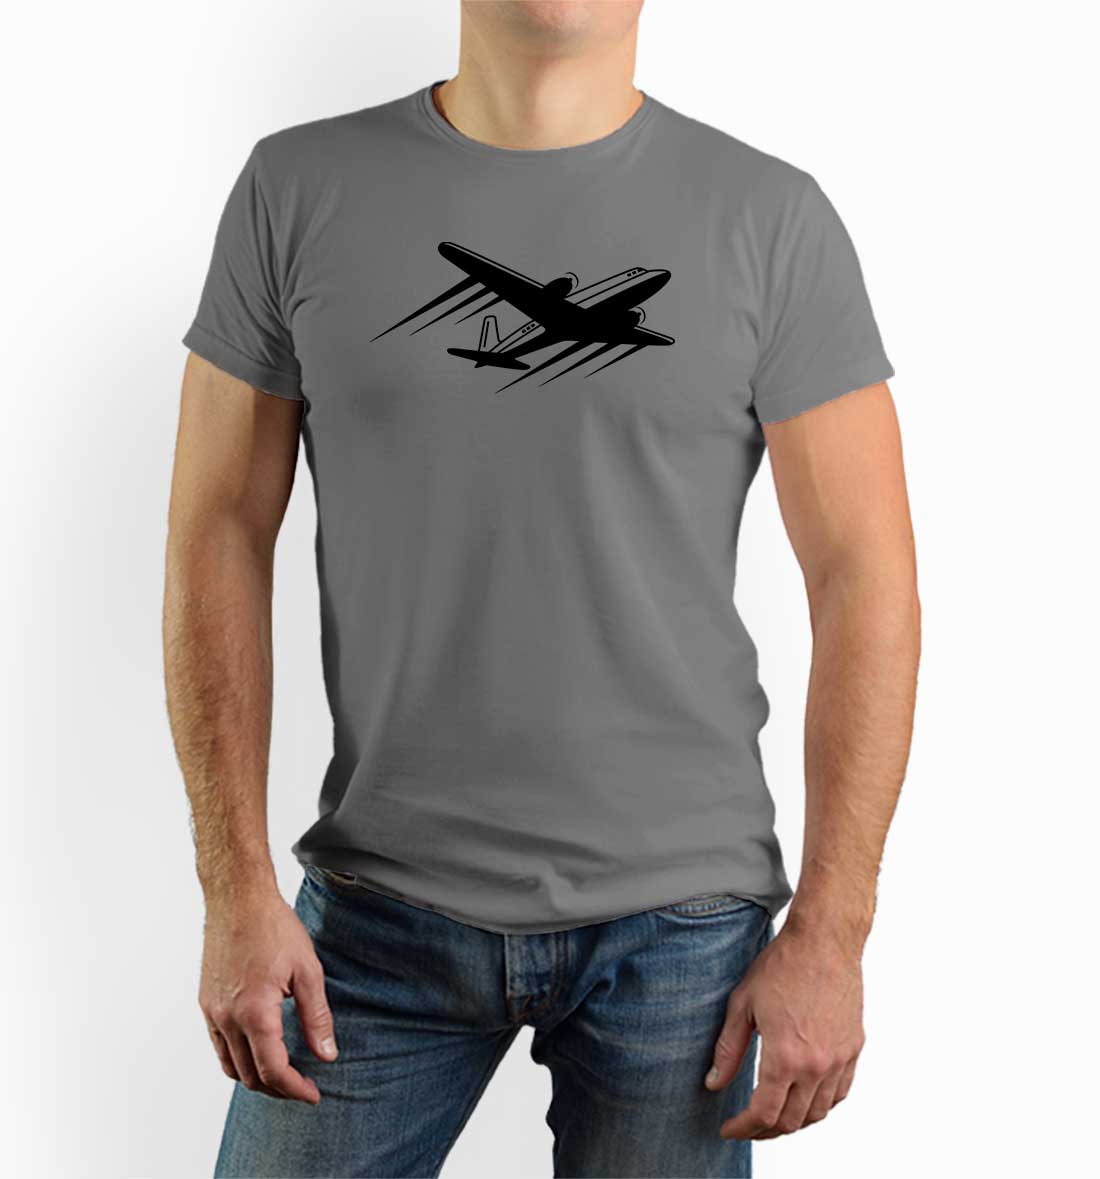 T-shirt with an airplane